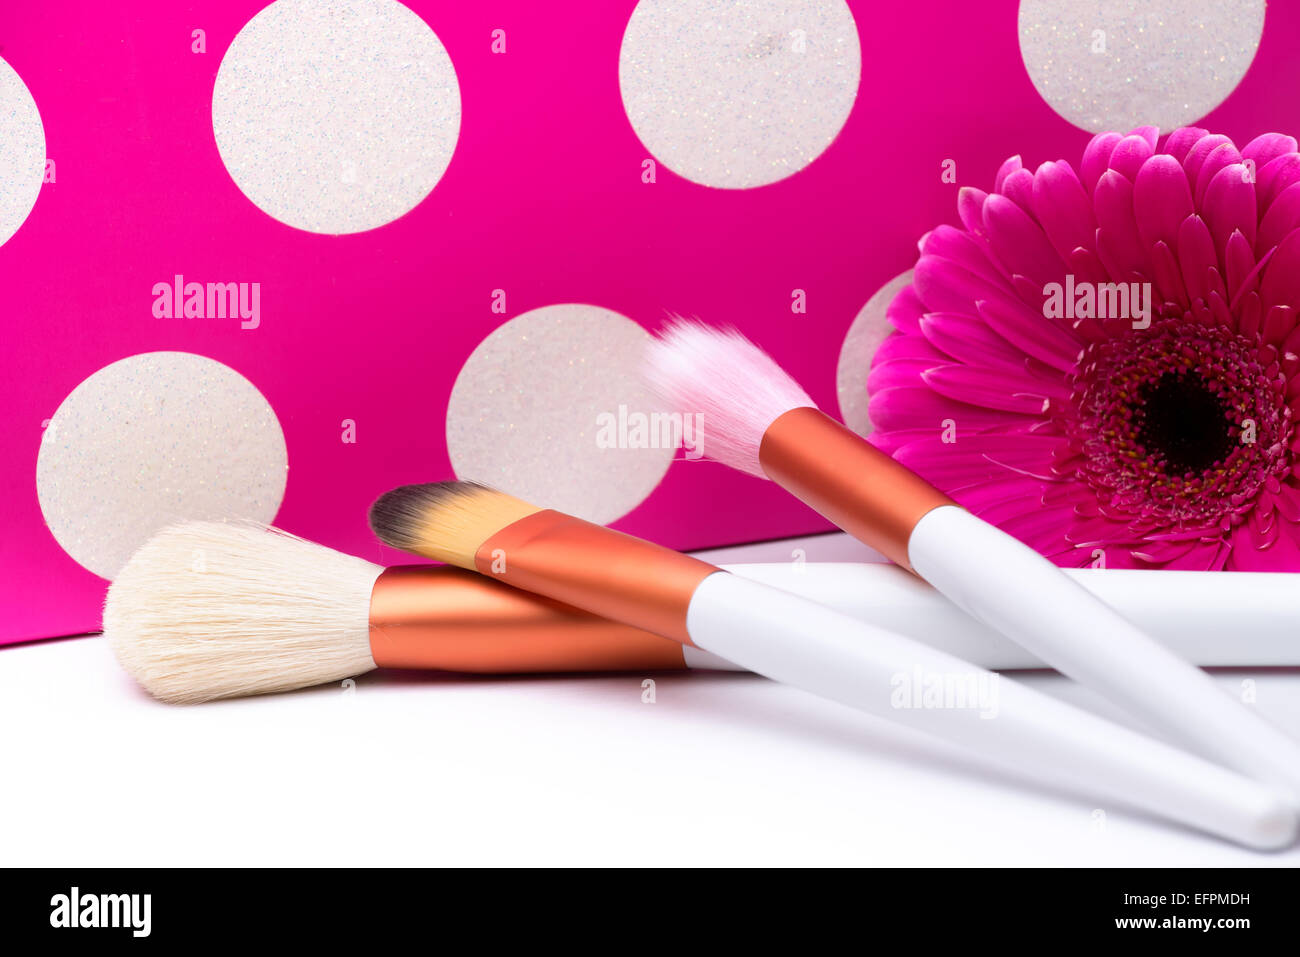 Makeup Brushes on polka dots pink background Stock Photo